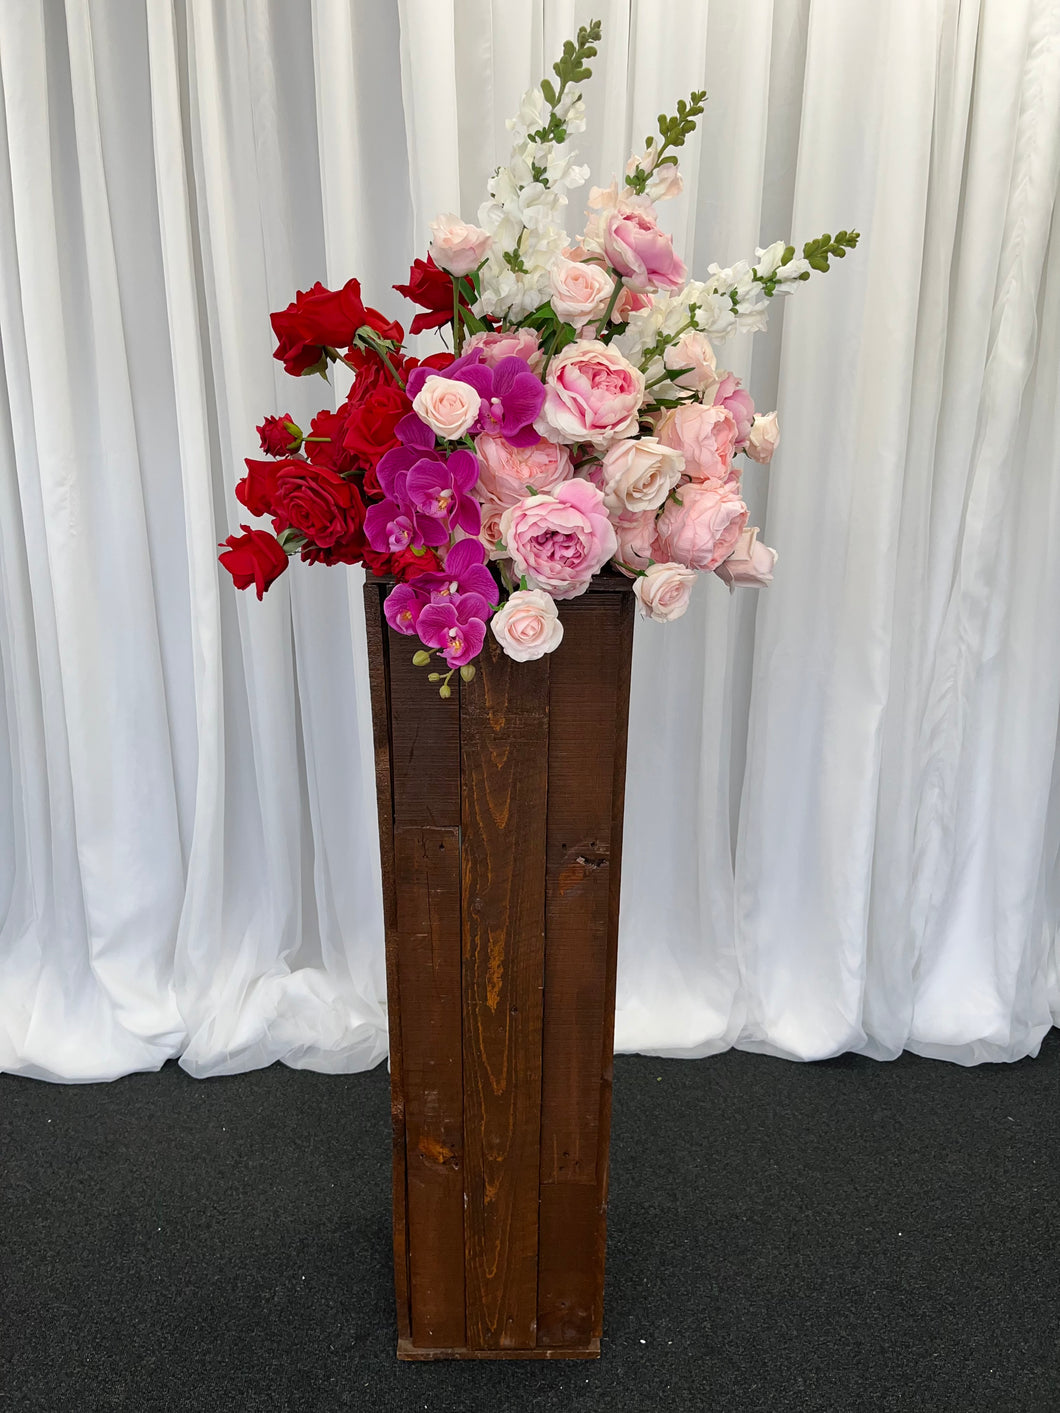 Rustic wooden plinth with Lola floral